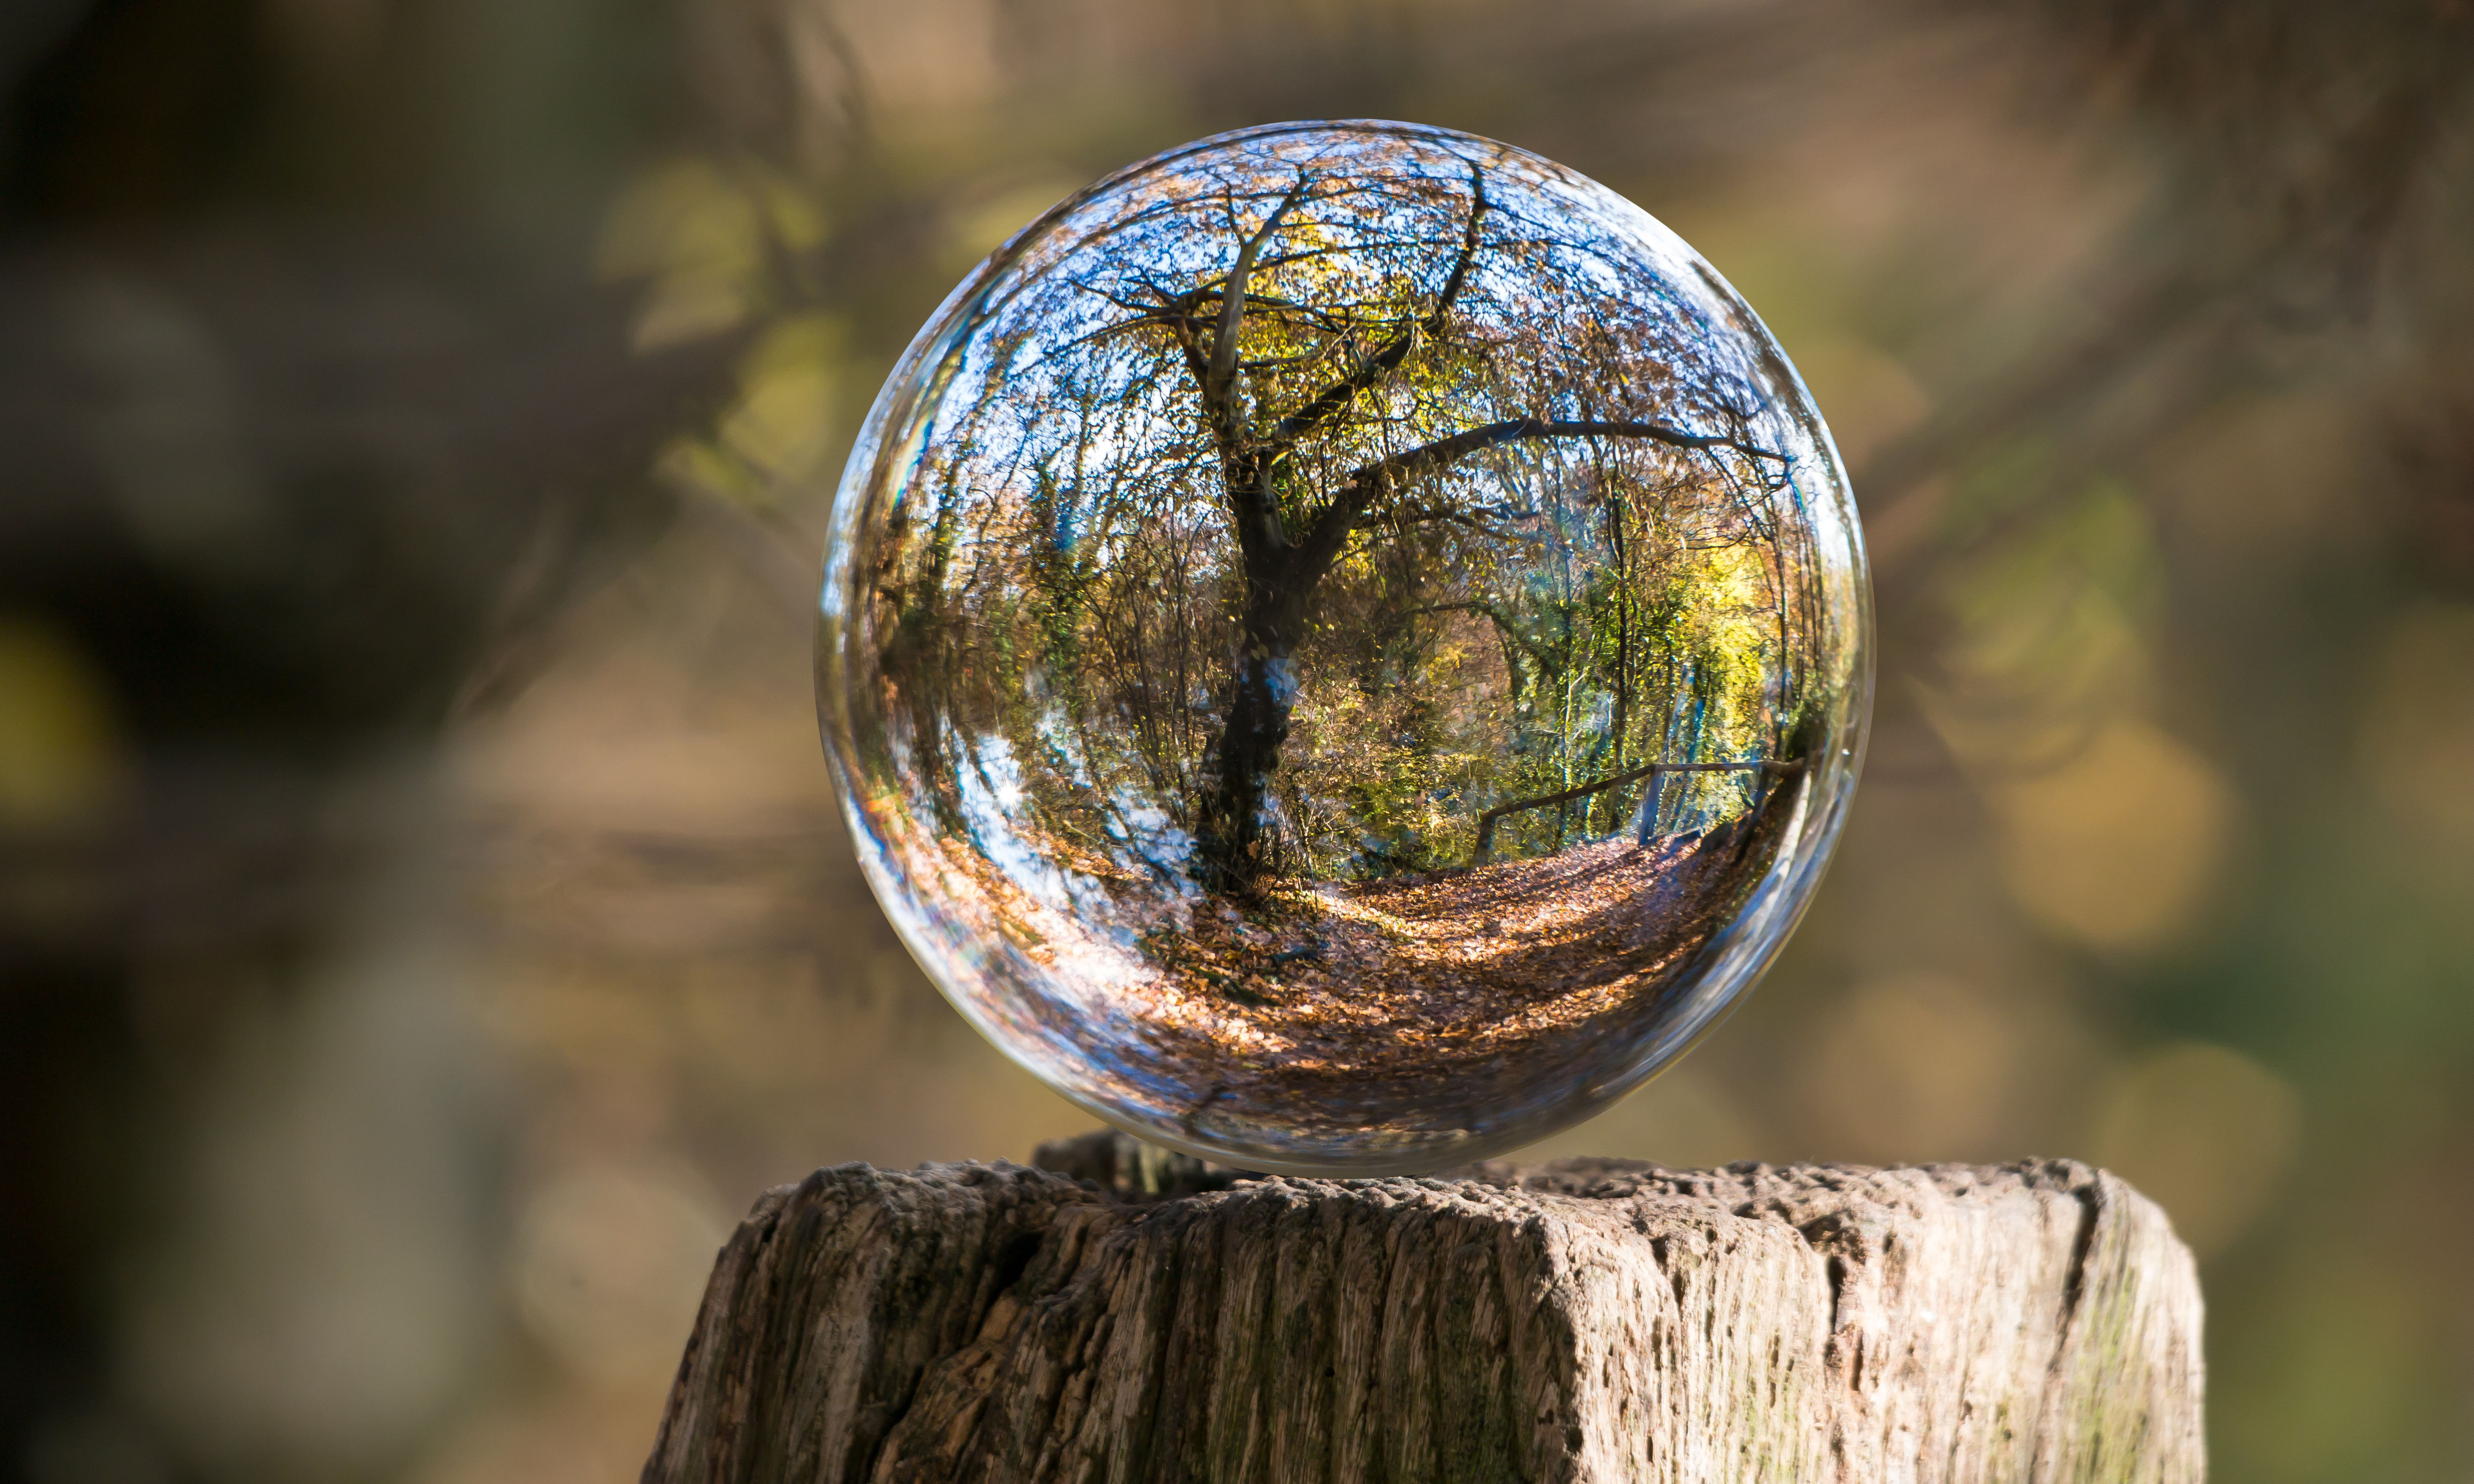 A glass ball perched atop a wooden post reflects a tree in the woods.